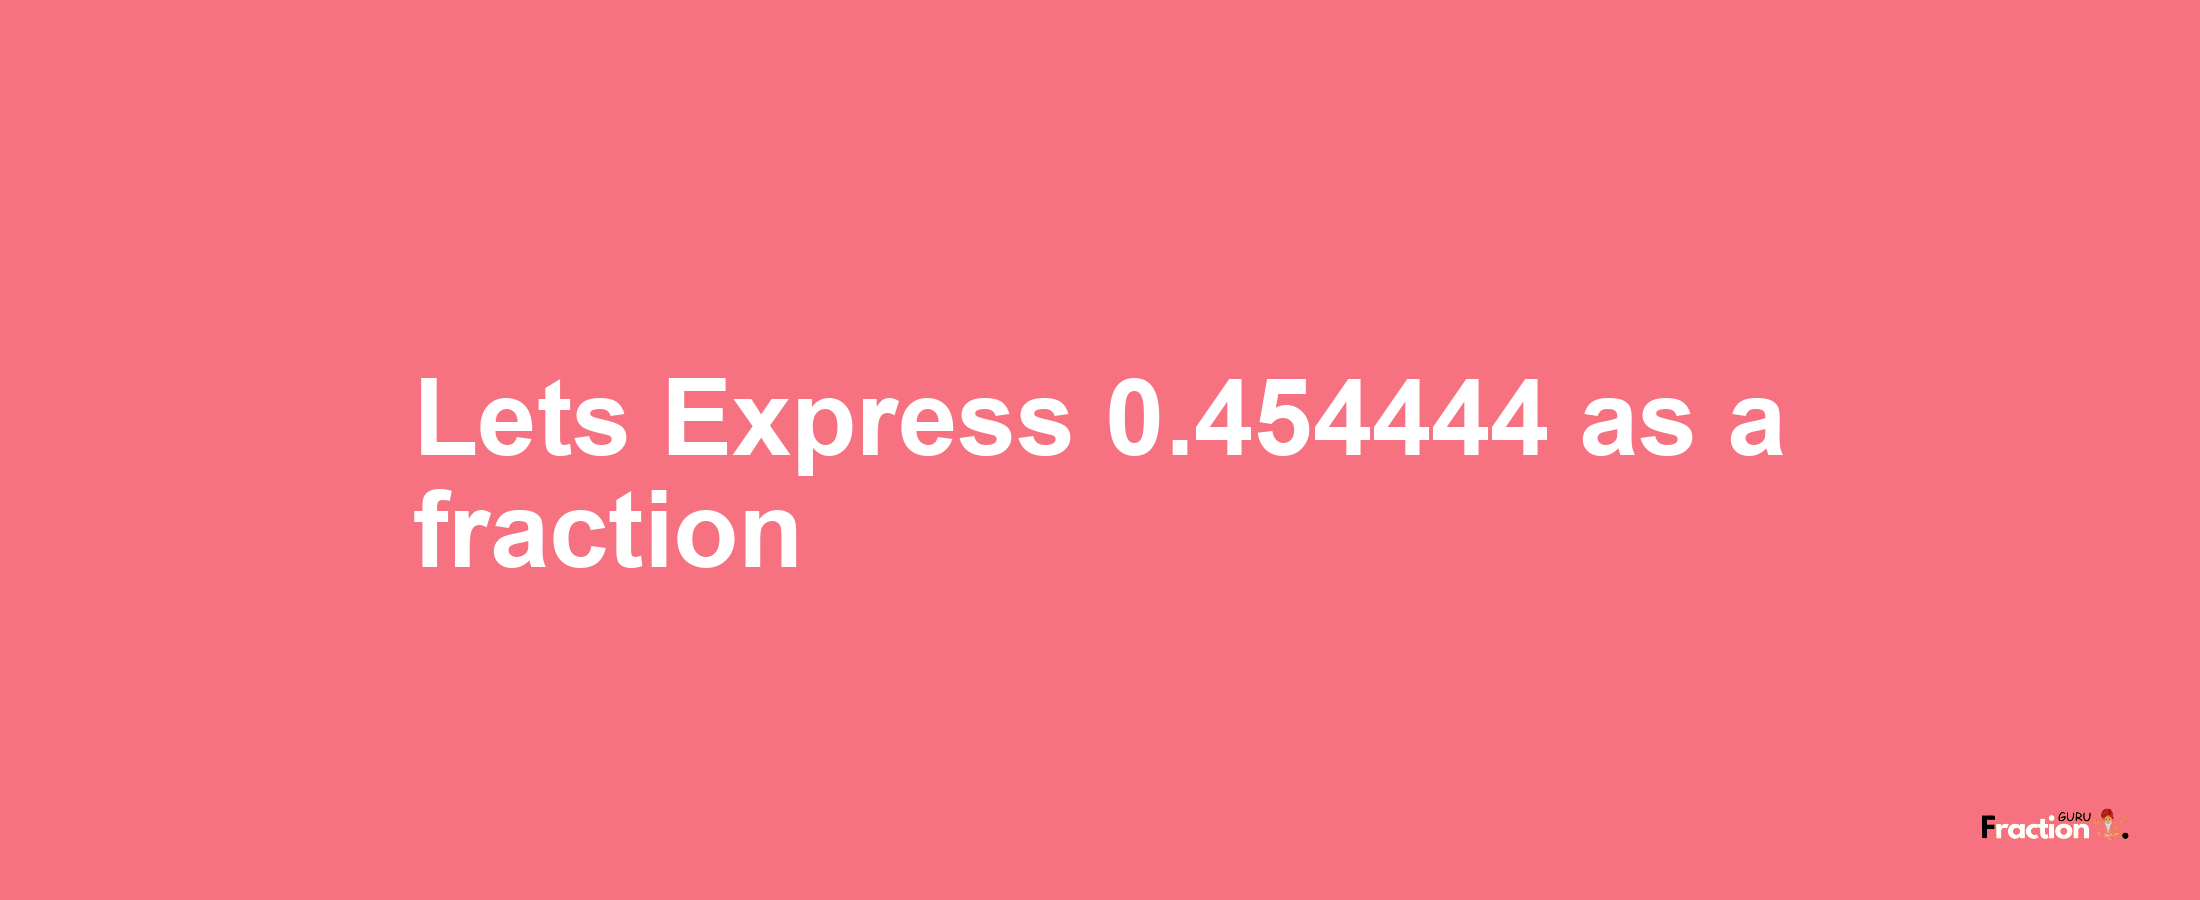 Lets Express 0.454444 as afraction